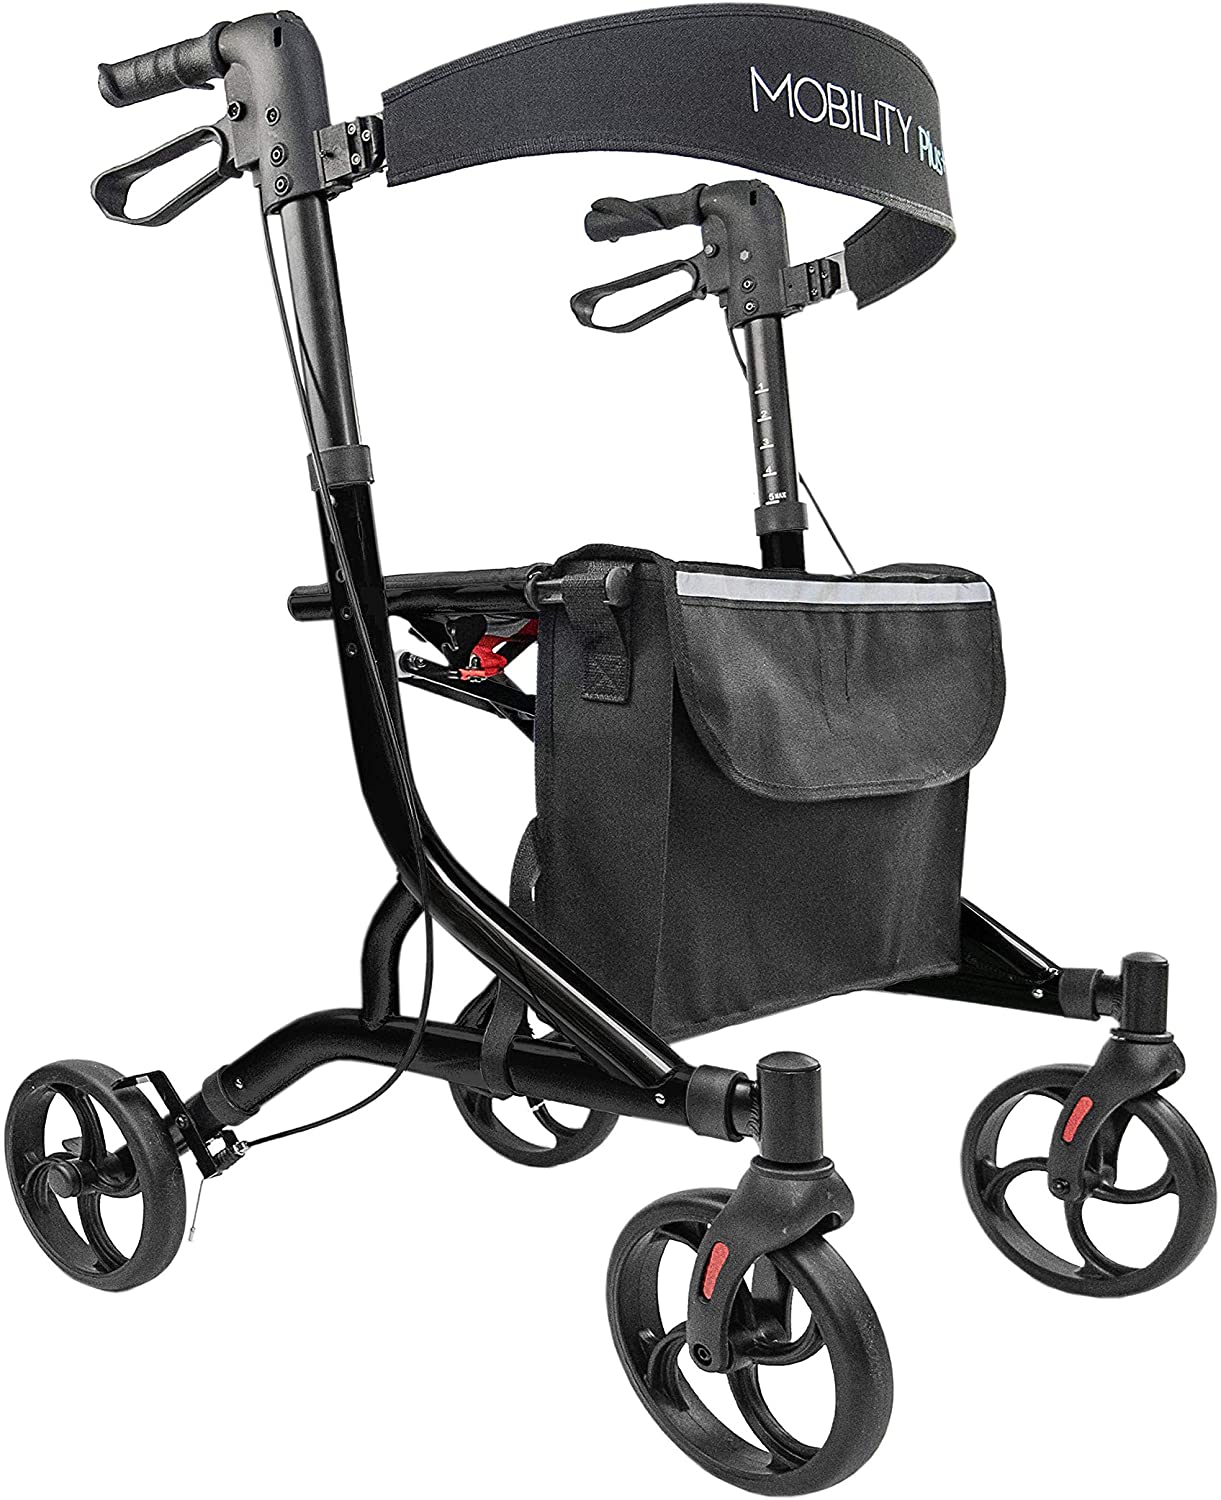 MOBILITY Plus+ LR10+ Lightweight Rollator - Indoor and Outdoor Walker - Foldable - Height 